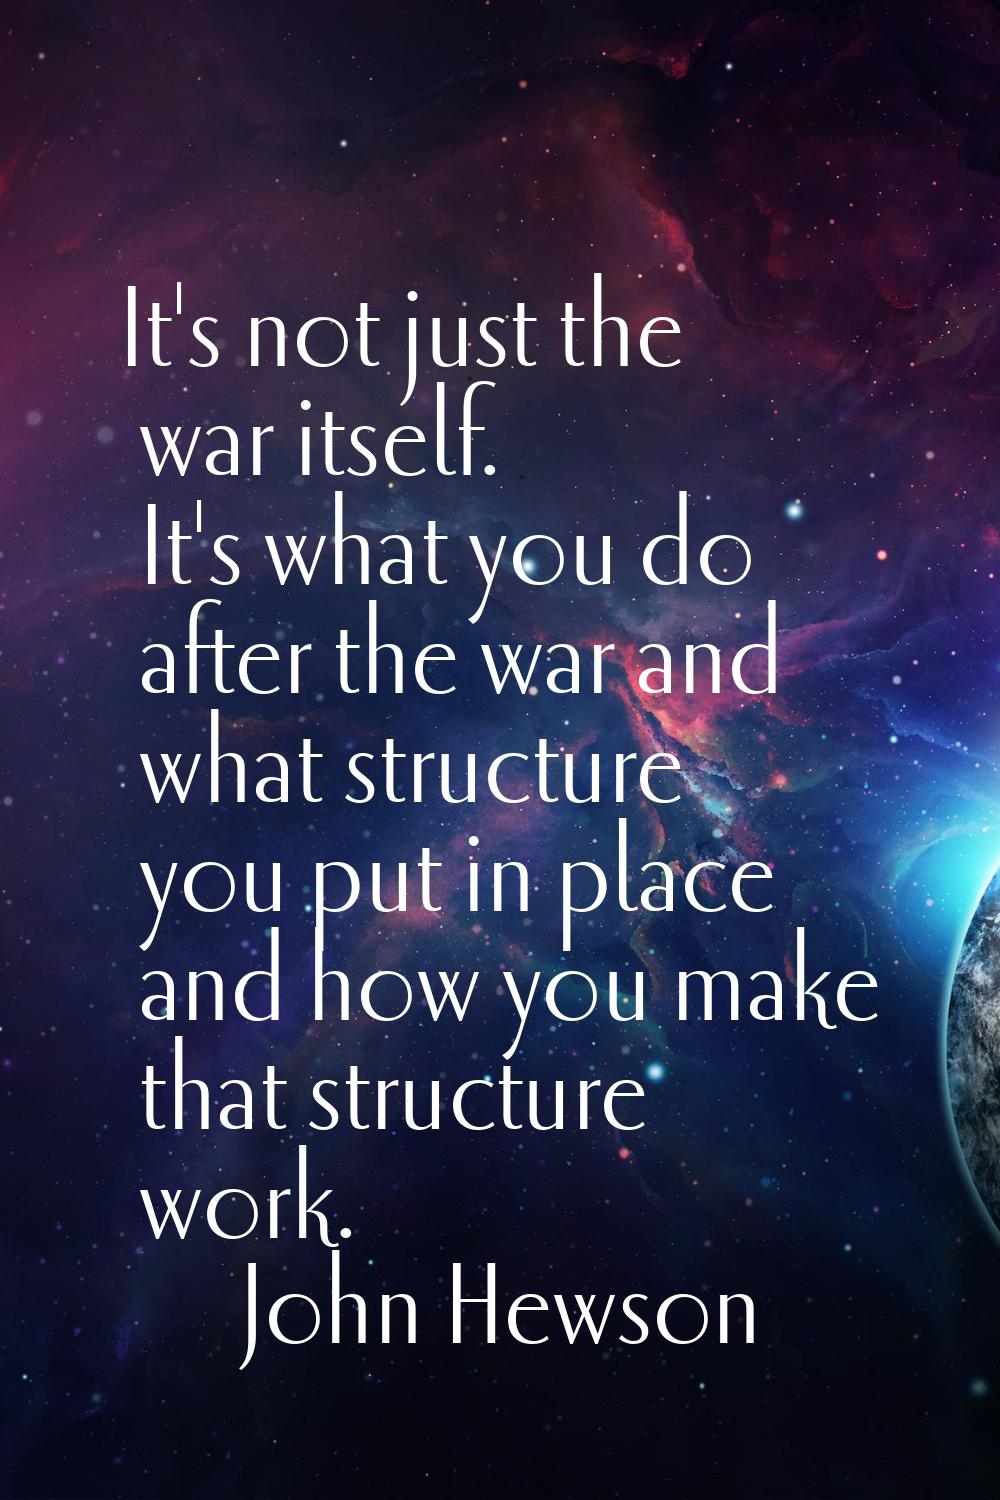 It's not just the war itself. It's what you do after the war and what structure you put in place an